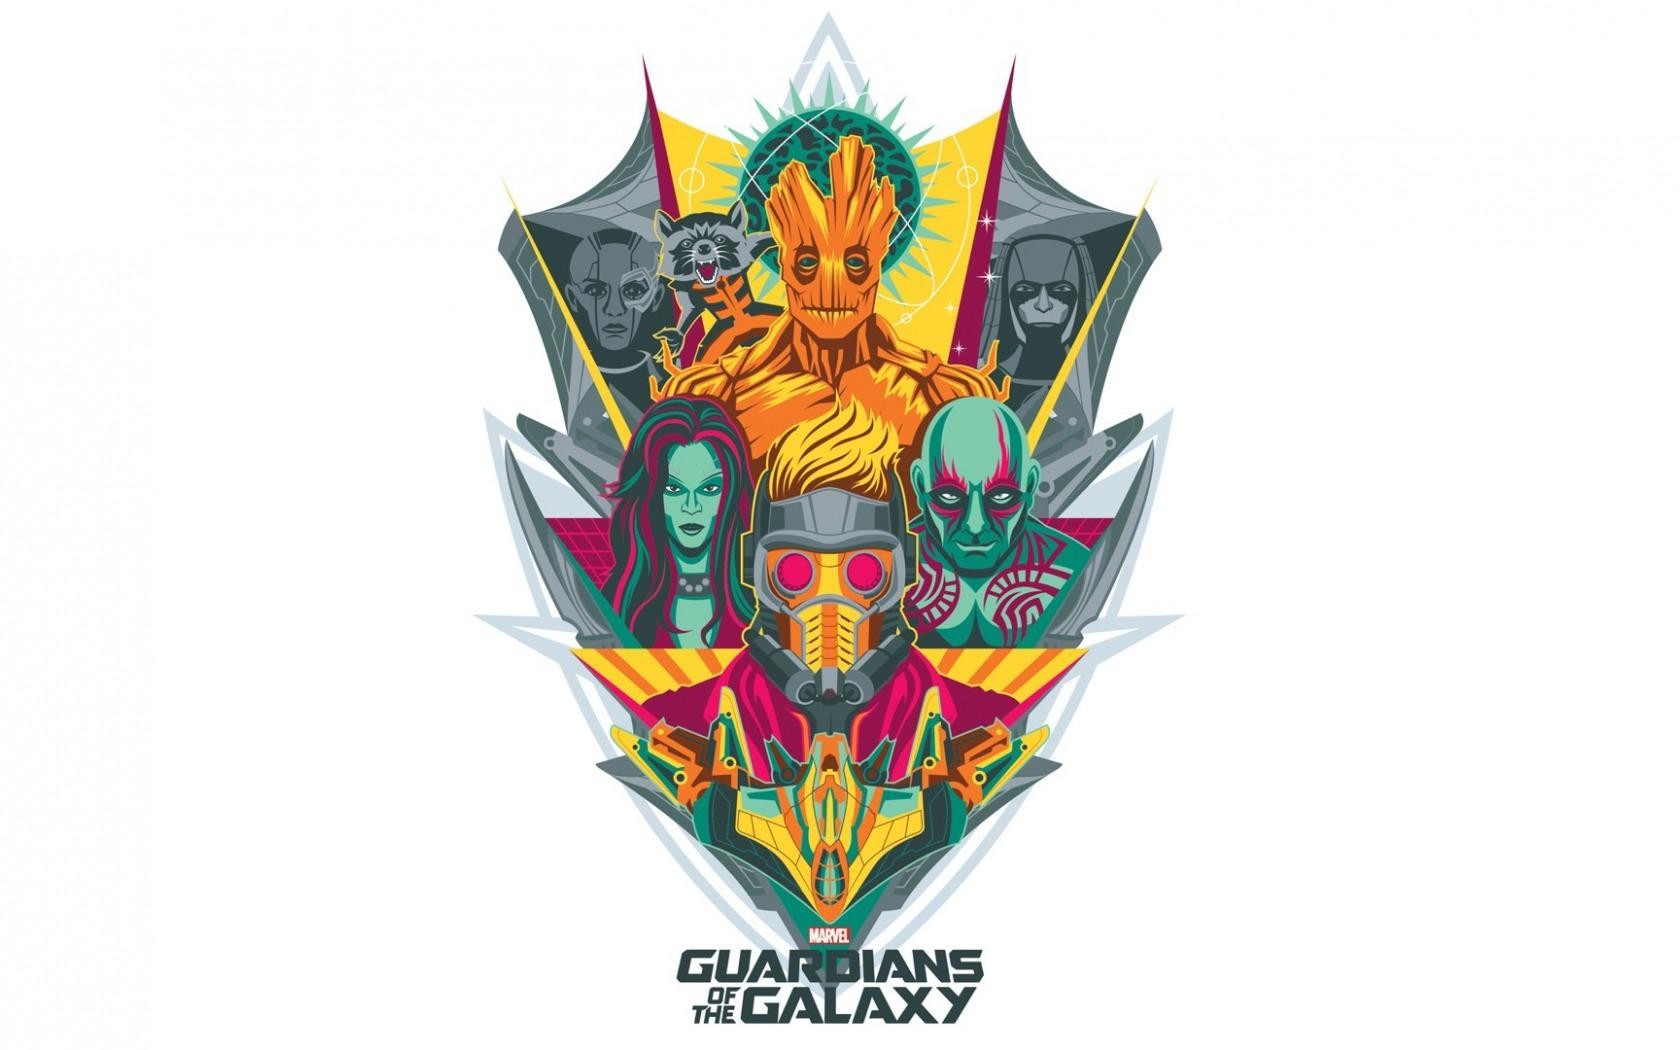 Guardians Of The Galaxy, Star Lord, Gamora, Rocket Raccoon, Groot, Drax The Destroyer, Simple Background, Artwork Wallpaper